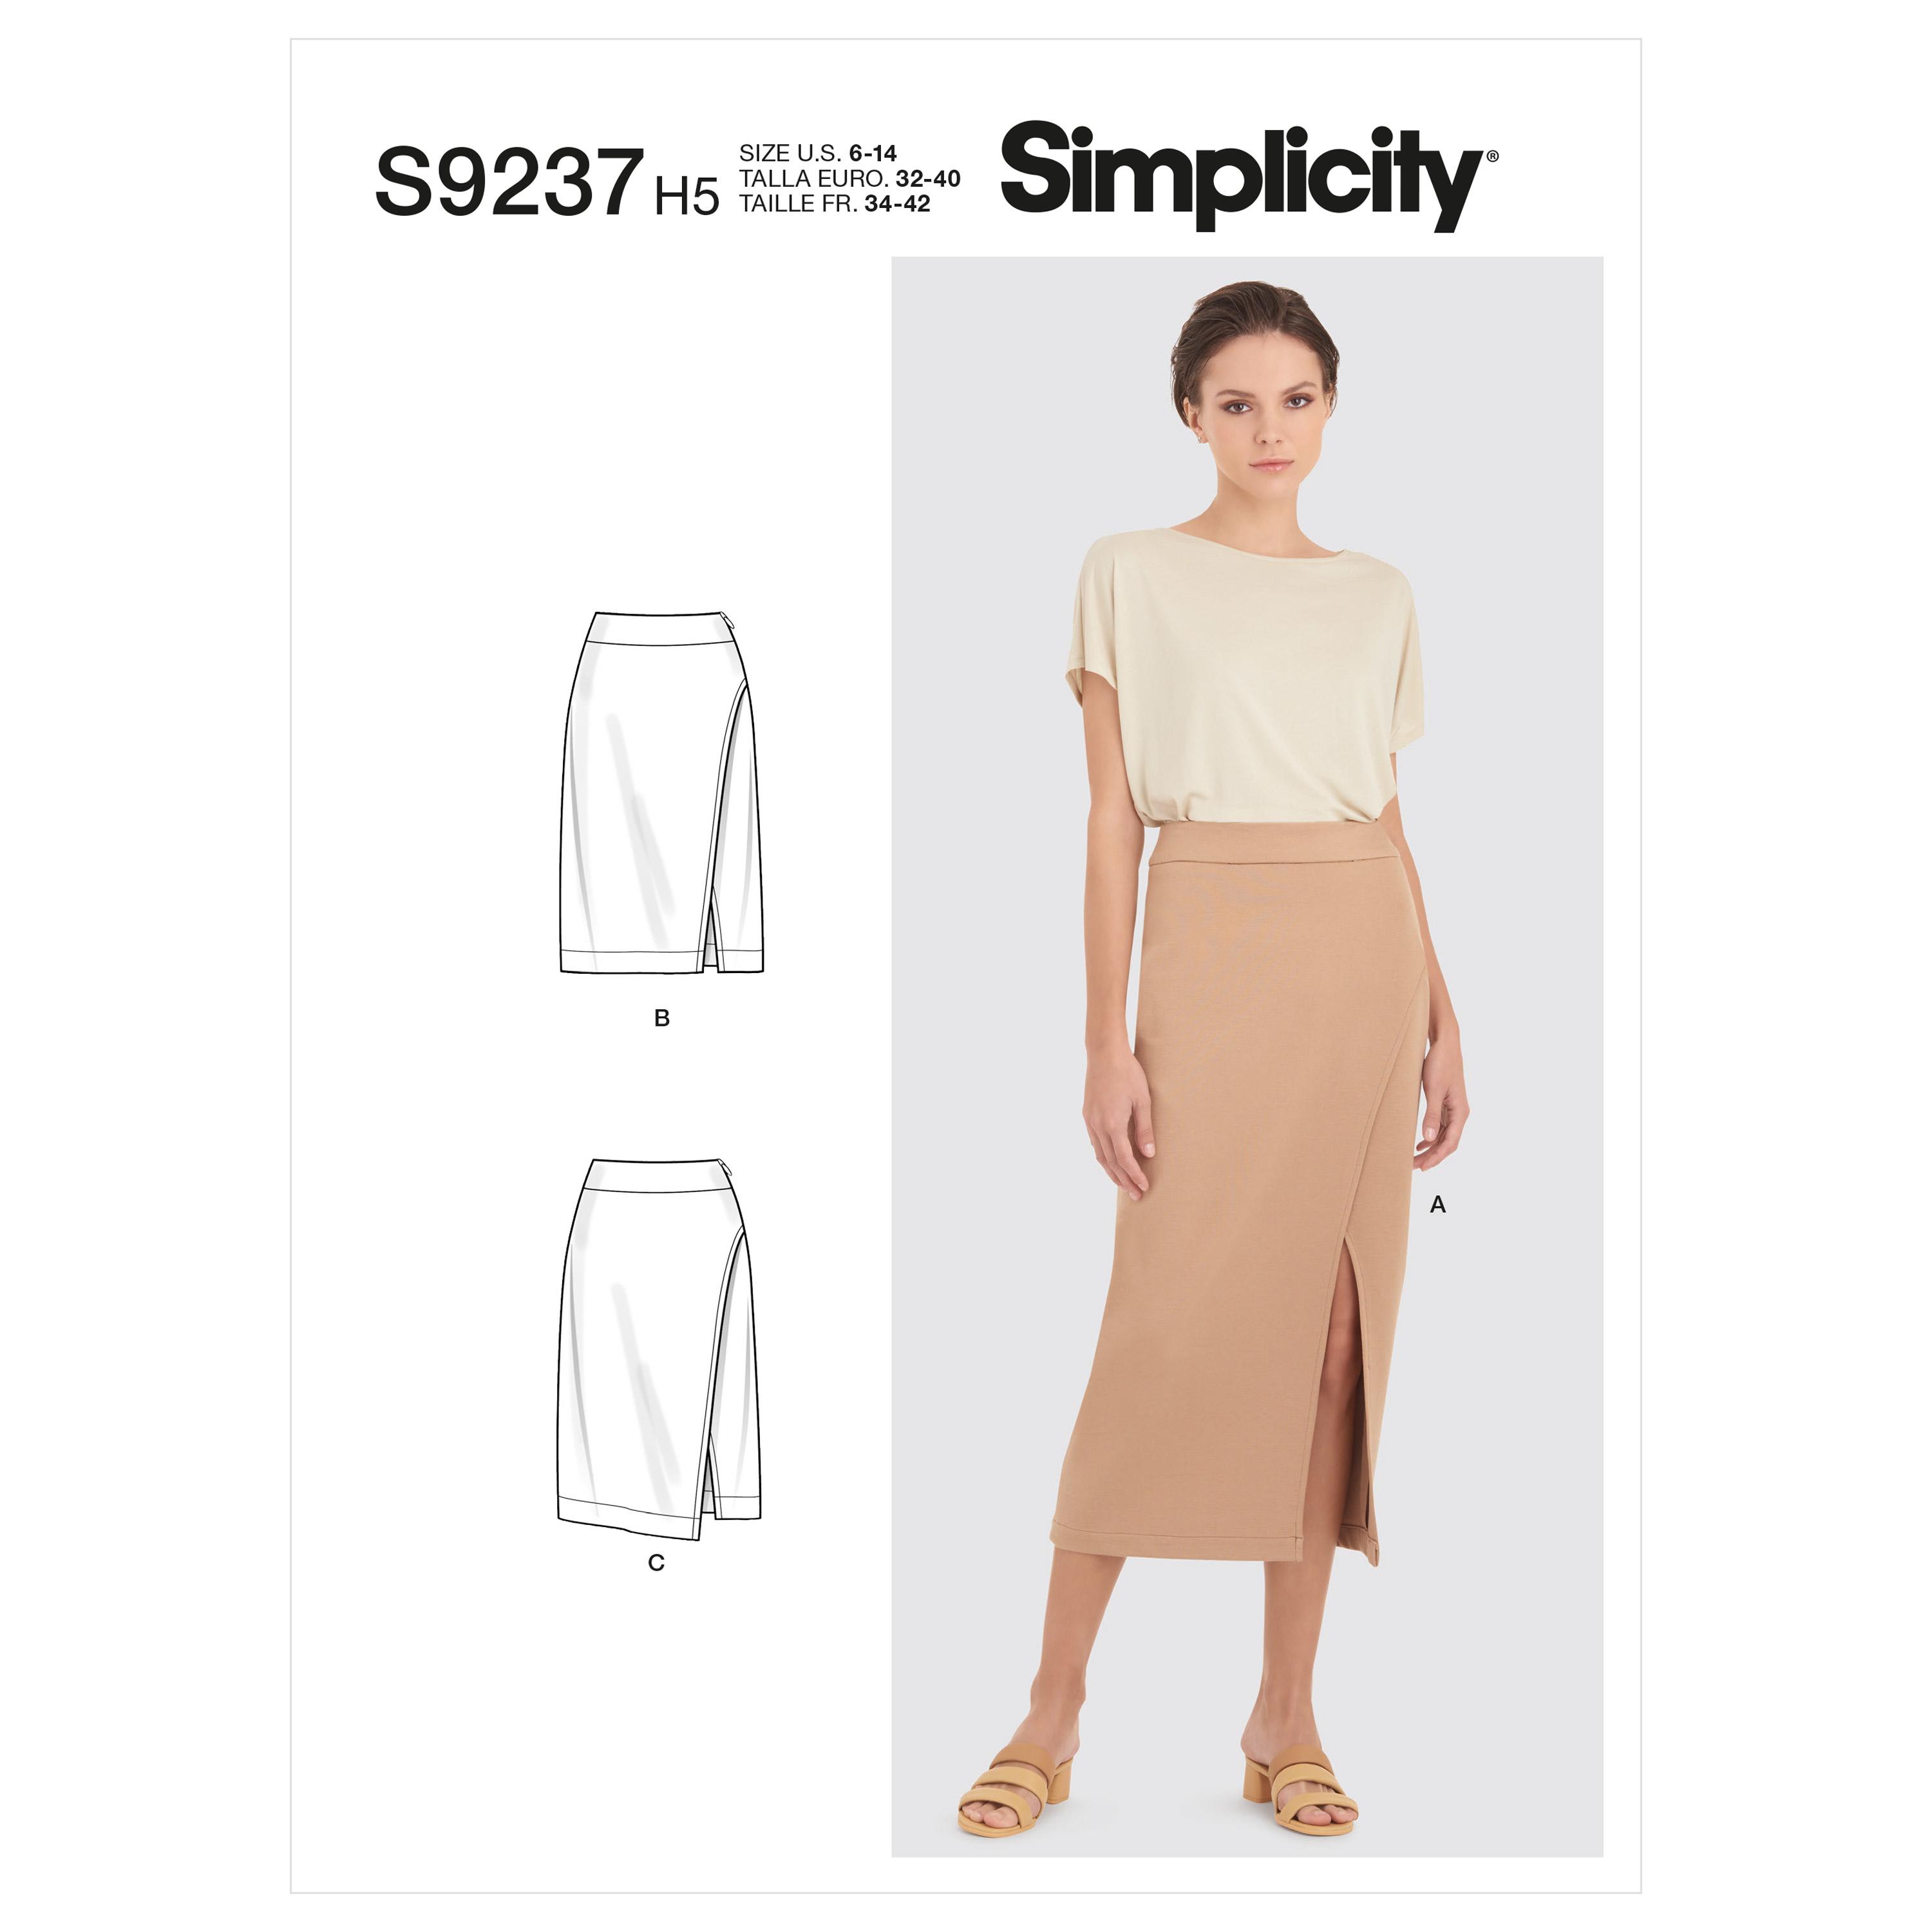 Simplicity Sewing Pattern S9237 Misses' Skirts